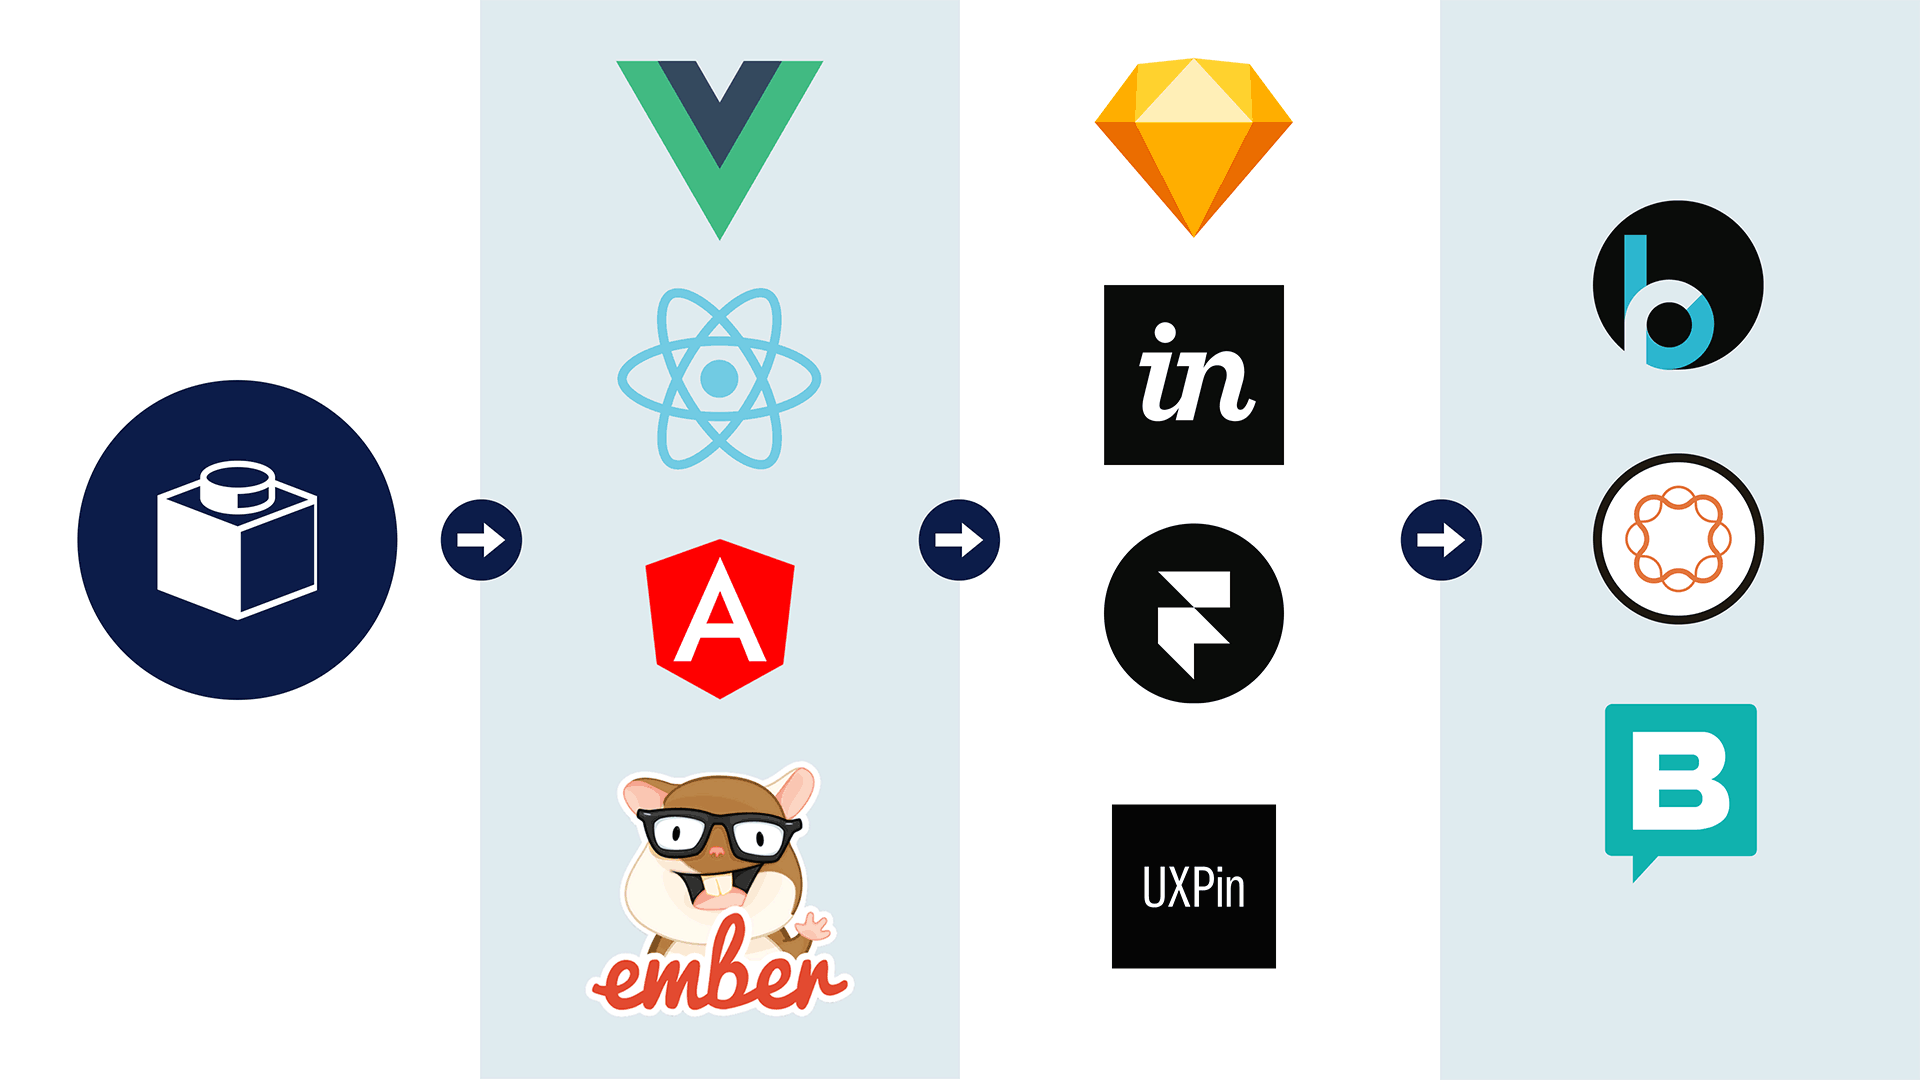 A single web component with an arrow pointing to a section containing the logos for JavaScript frameworks Vue, React, Angular and Ember. That section has an arrow pointing to logos for design tools Sketch, Invision, Framer, and UXPin. A final arrow leads from the design tools to content management systems Bloomreach, Adobe Experience Manager, and Storyblok